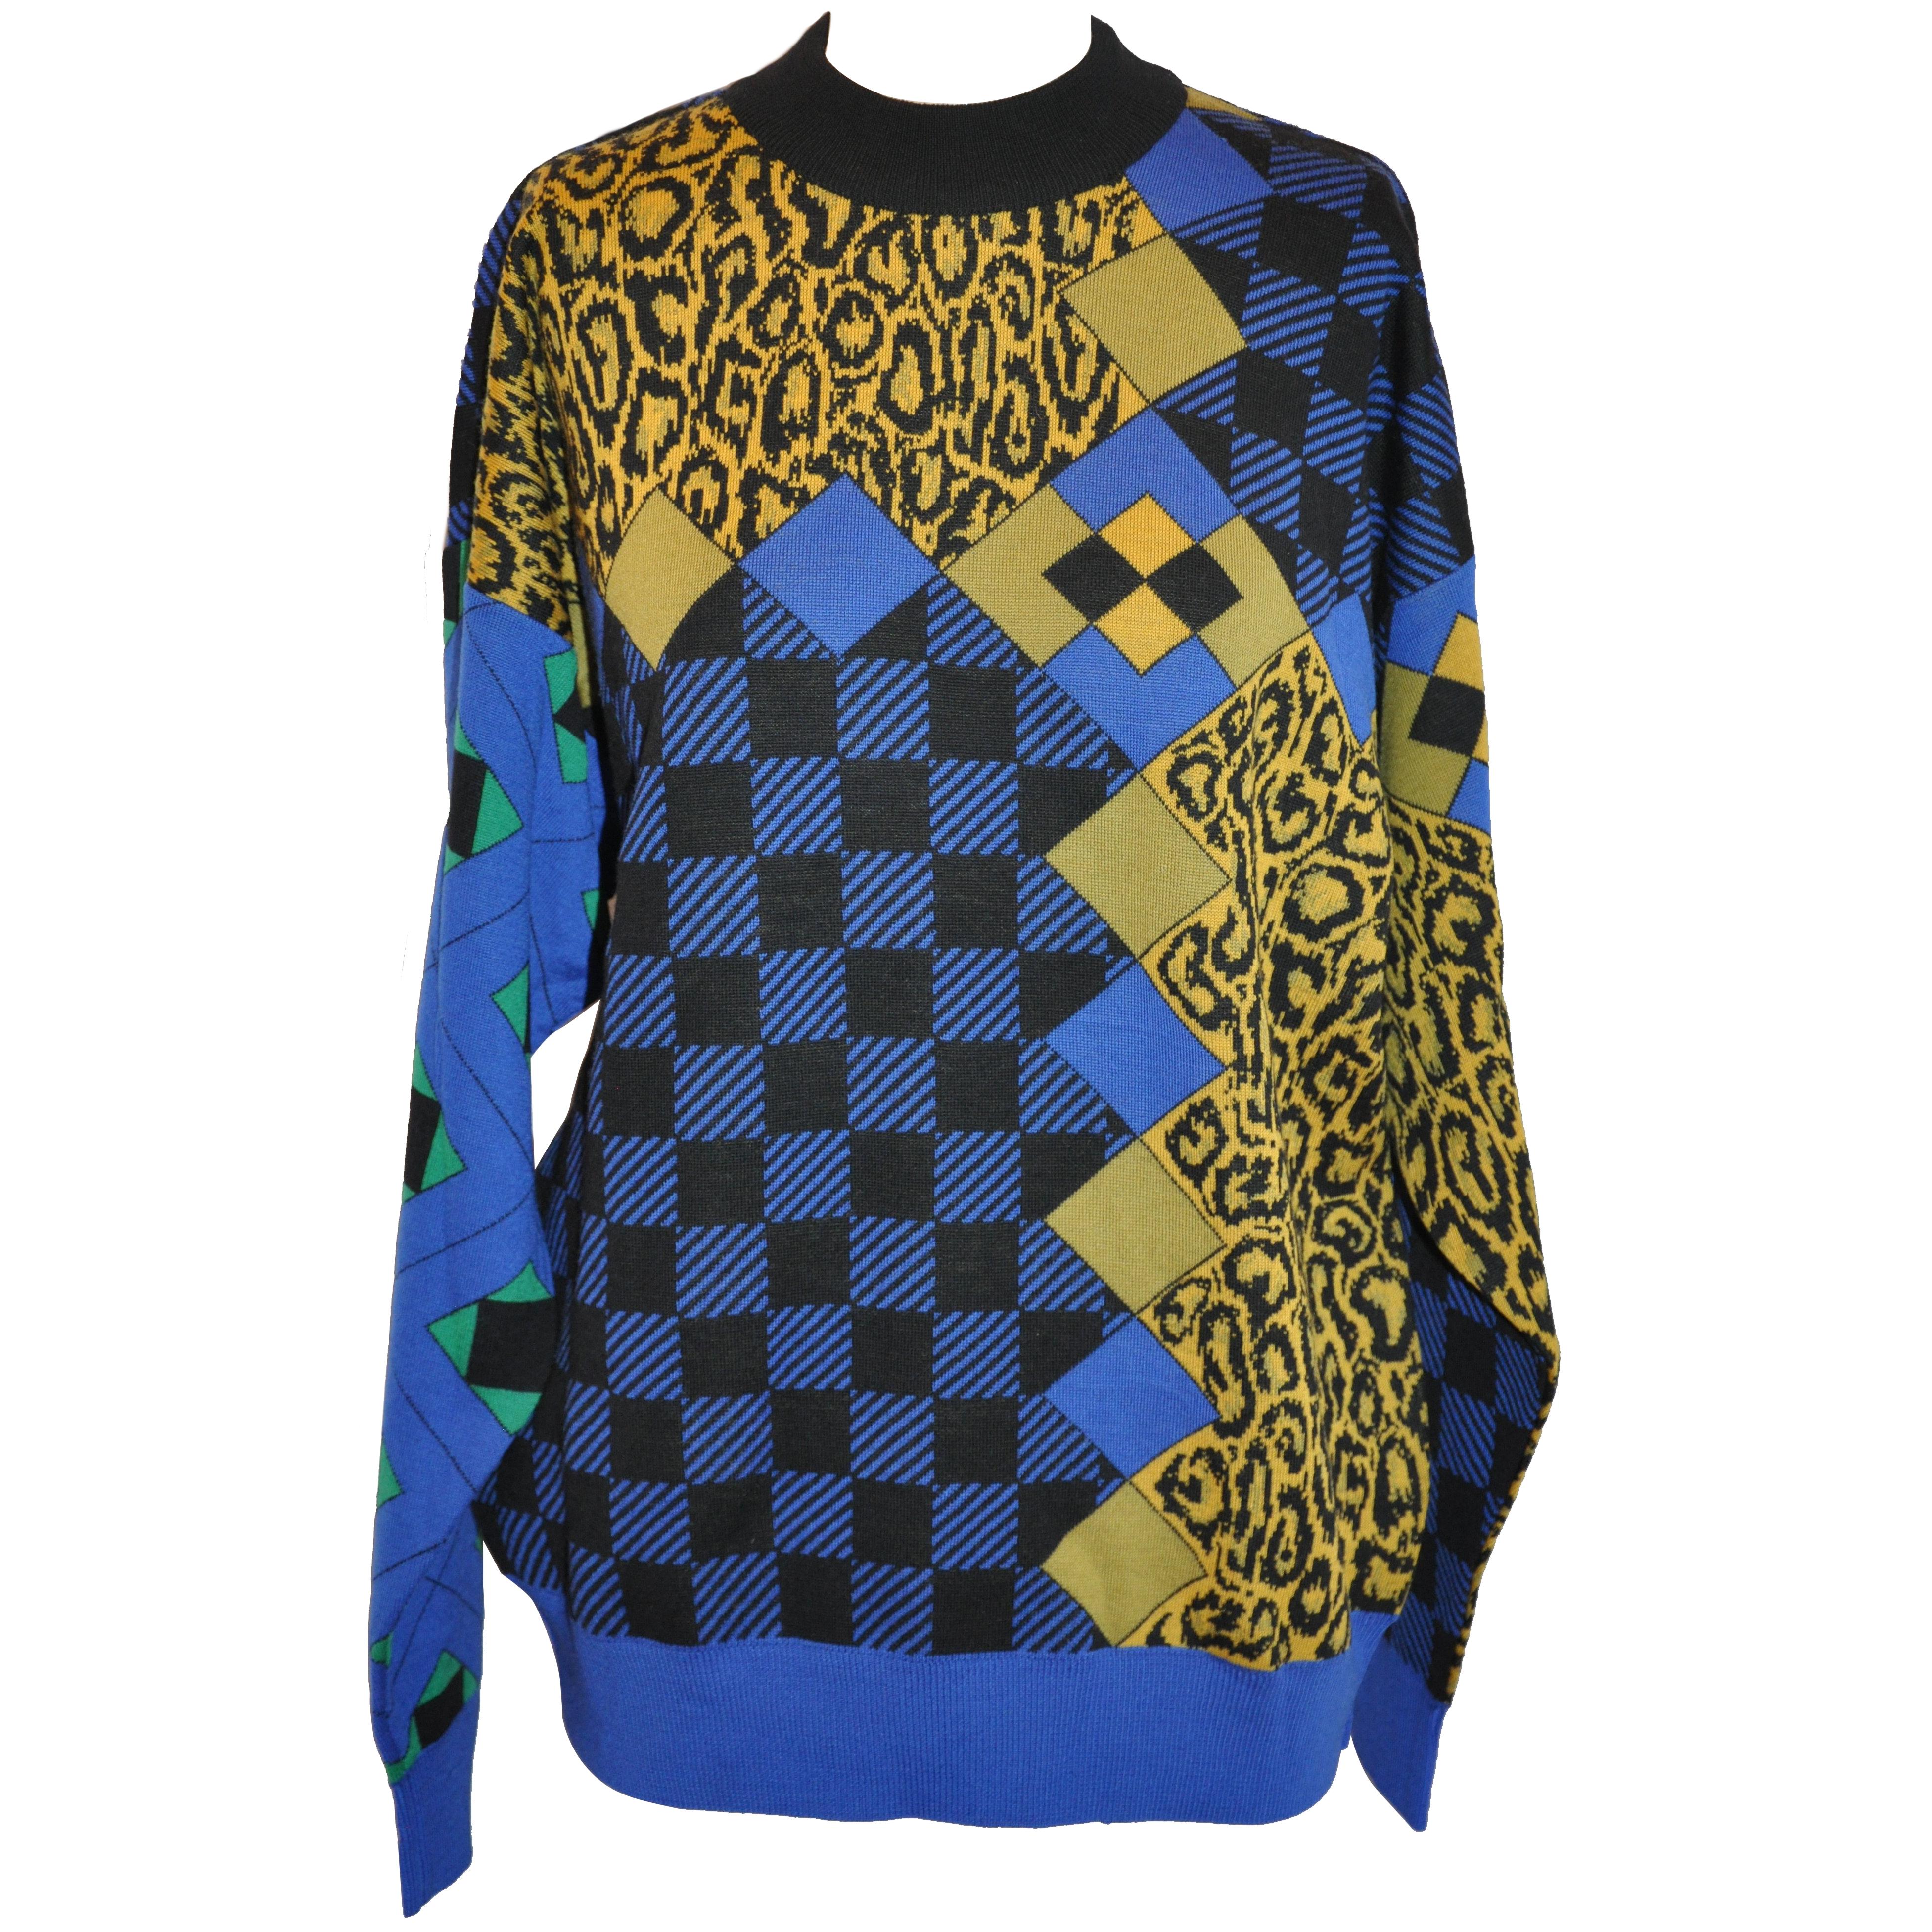 Gianni Versace Men's Multi-Color "Color Block Abstract & Leopard" Pullover